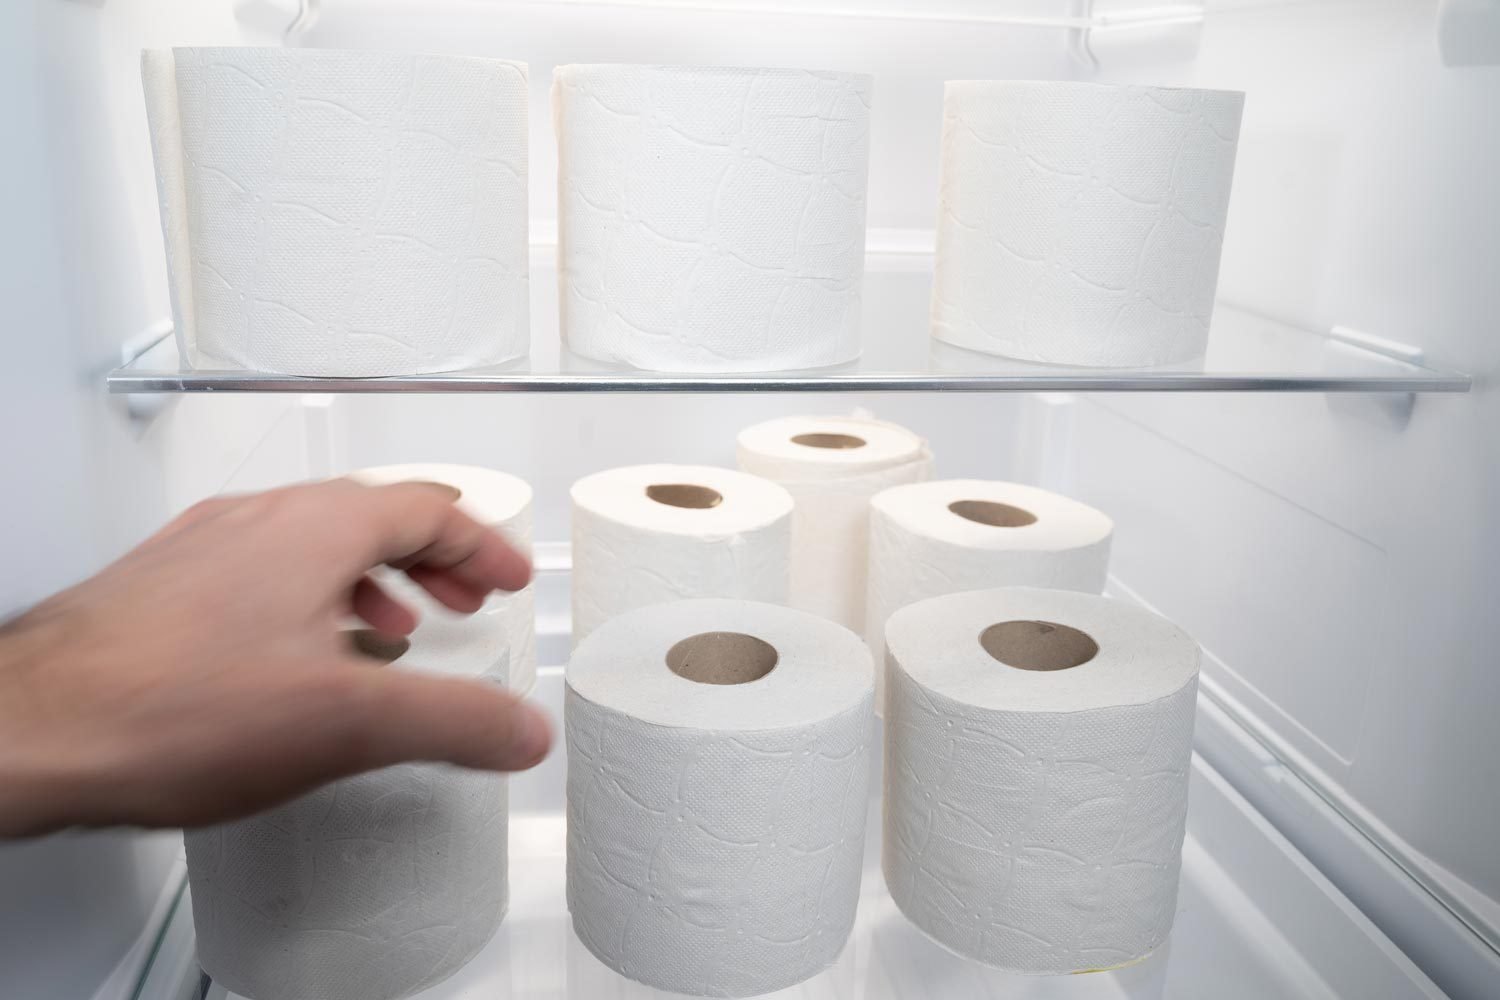 A Person Is Going To Take Or Leave A Roll Of Toilet Paper Inside A Refrigerator That Is Full Of Toilet Paper Rolls